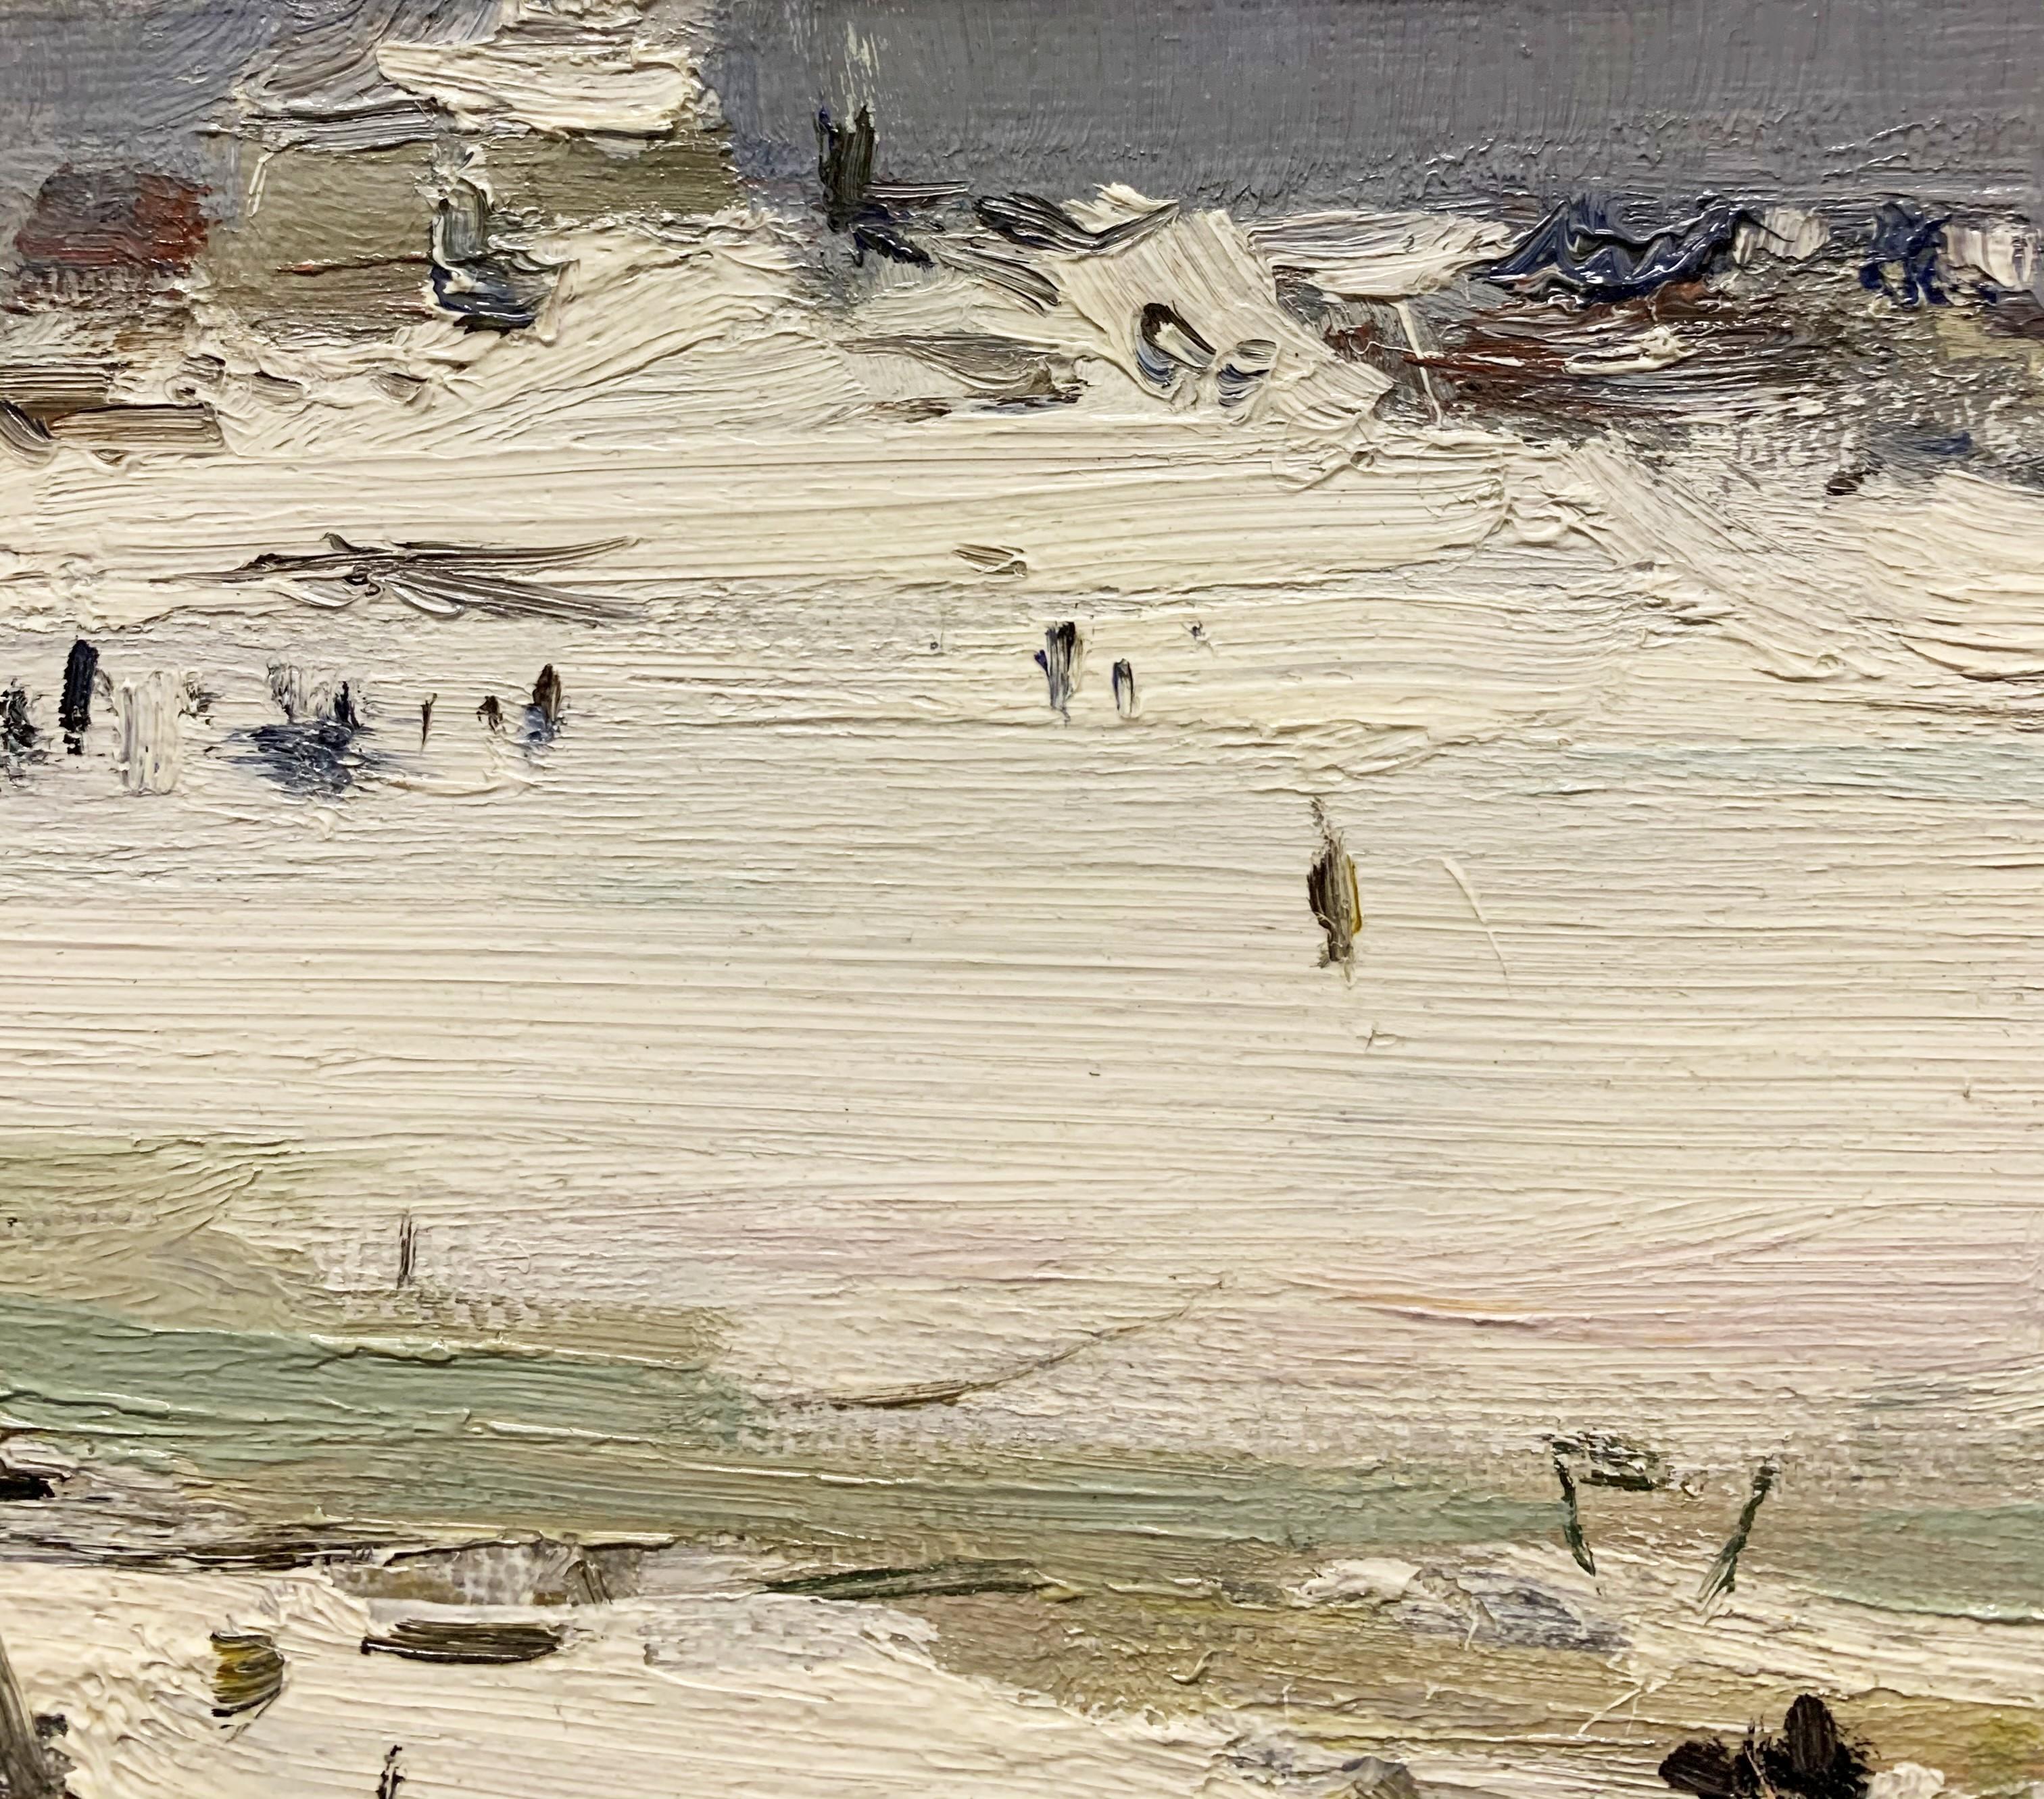 Boats , frozen ,lake,Russia, Winter,White,Snow, Free shipping

LEONID VAICHLIA  (St. Petersburg, 1922)

Works by Leonid Vaichlia can be found in various private collections in Europe, Japan, United States and in the following museums:


Mosca, The